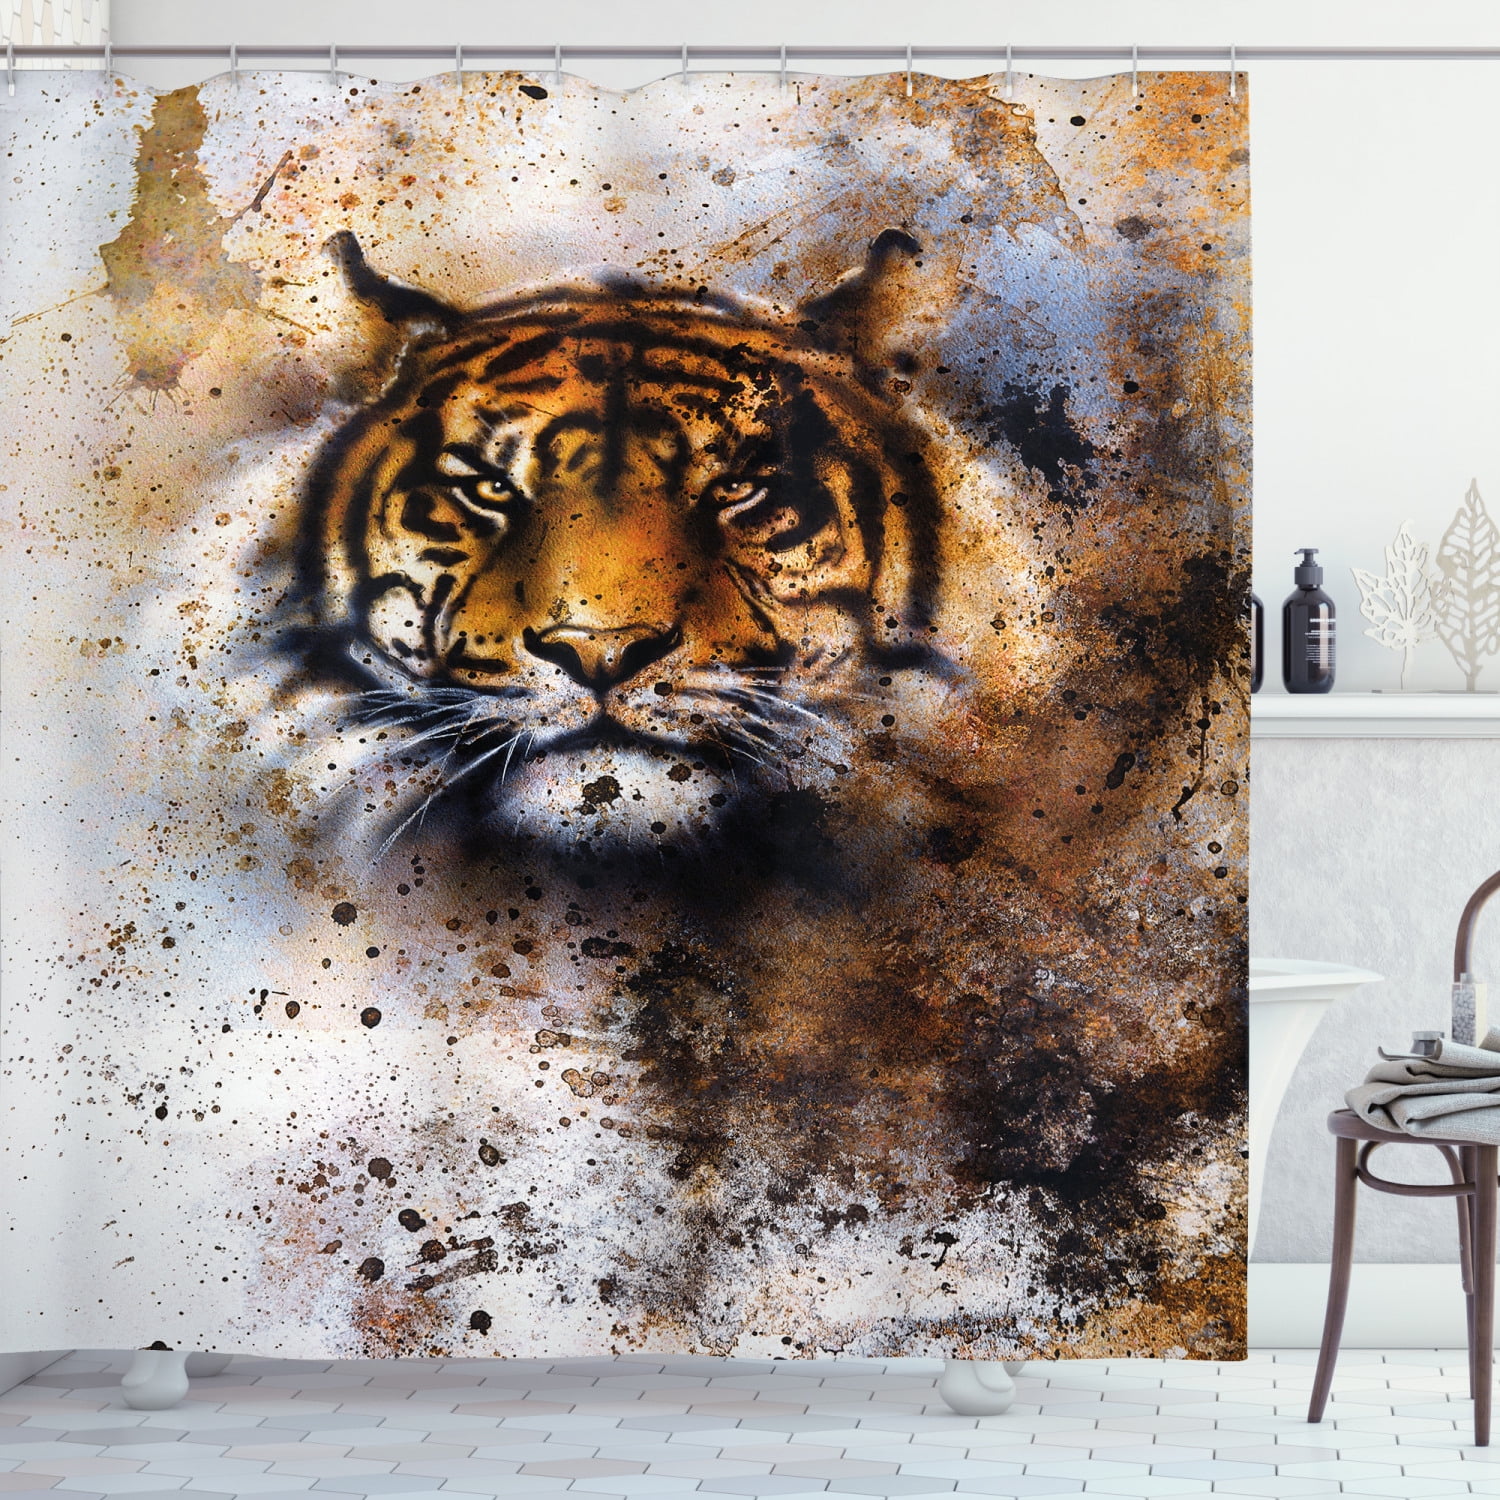 Tiger In Rainforest Bathroom Polyester Fabric Shower Curtain Set 71Inches Long 